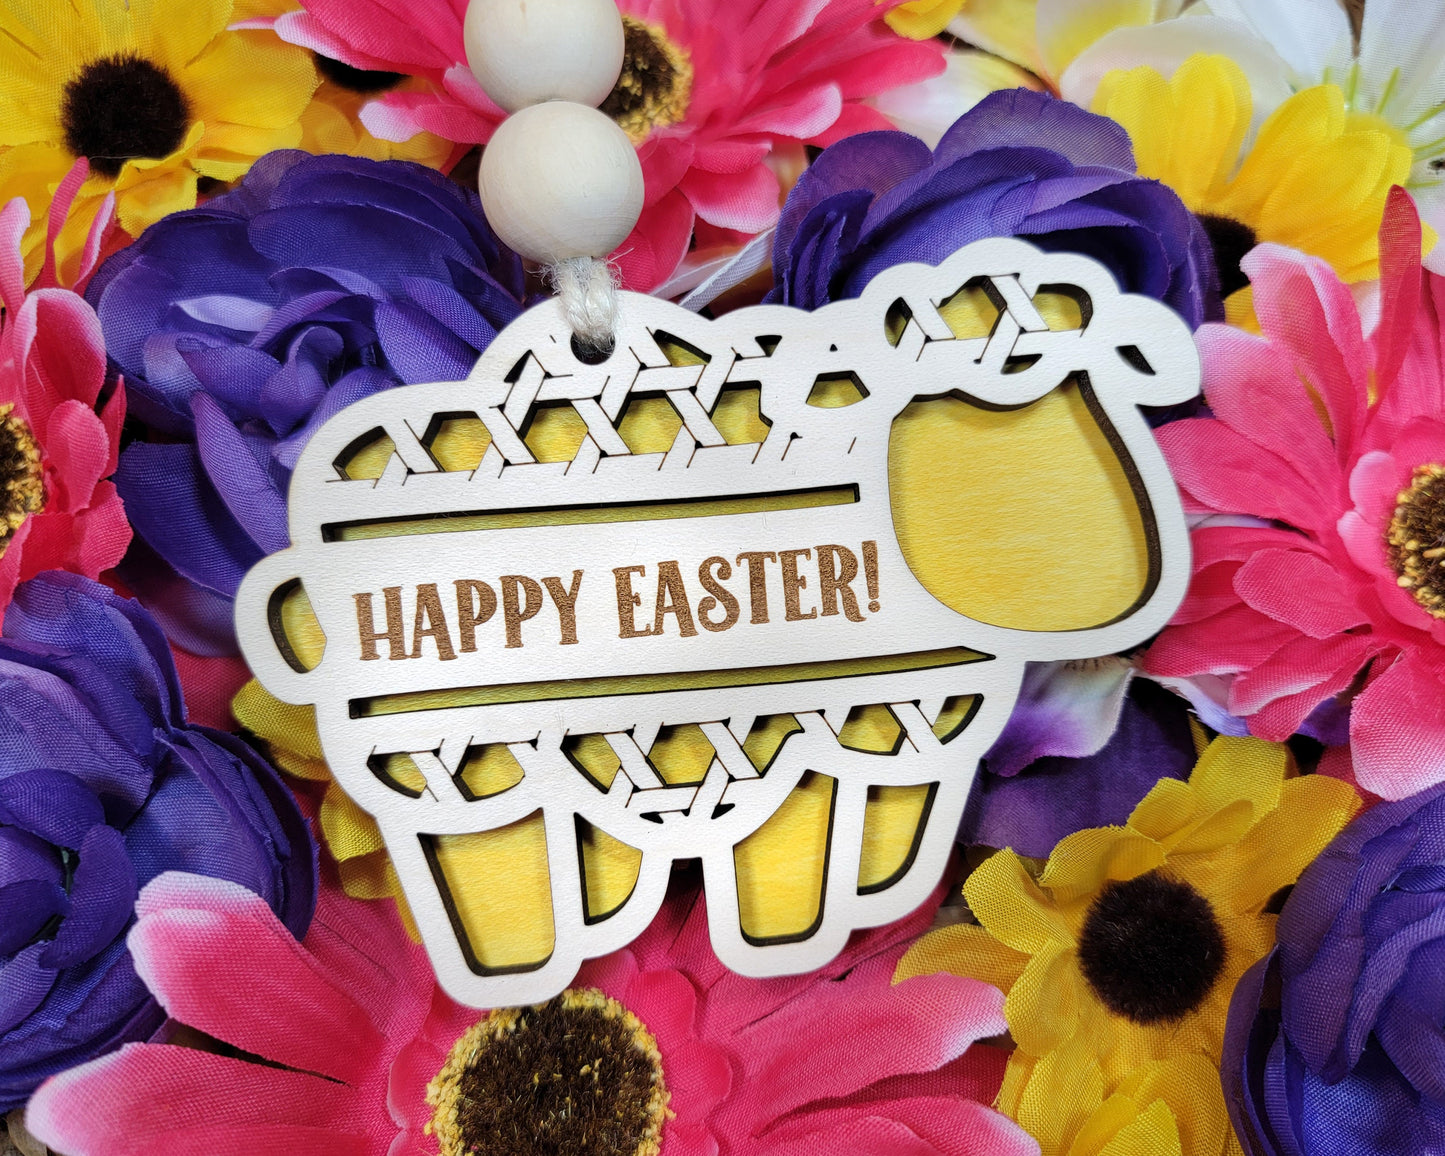 The Little Blessing Easter Tags - 20 Unique designs - SVG, PDF, AI File Download - Glowforge Tested